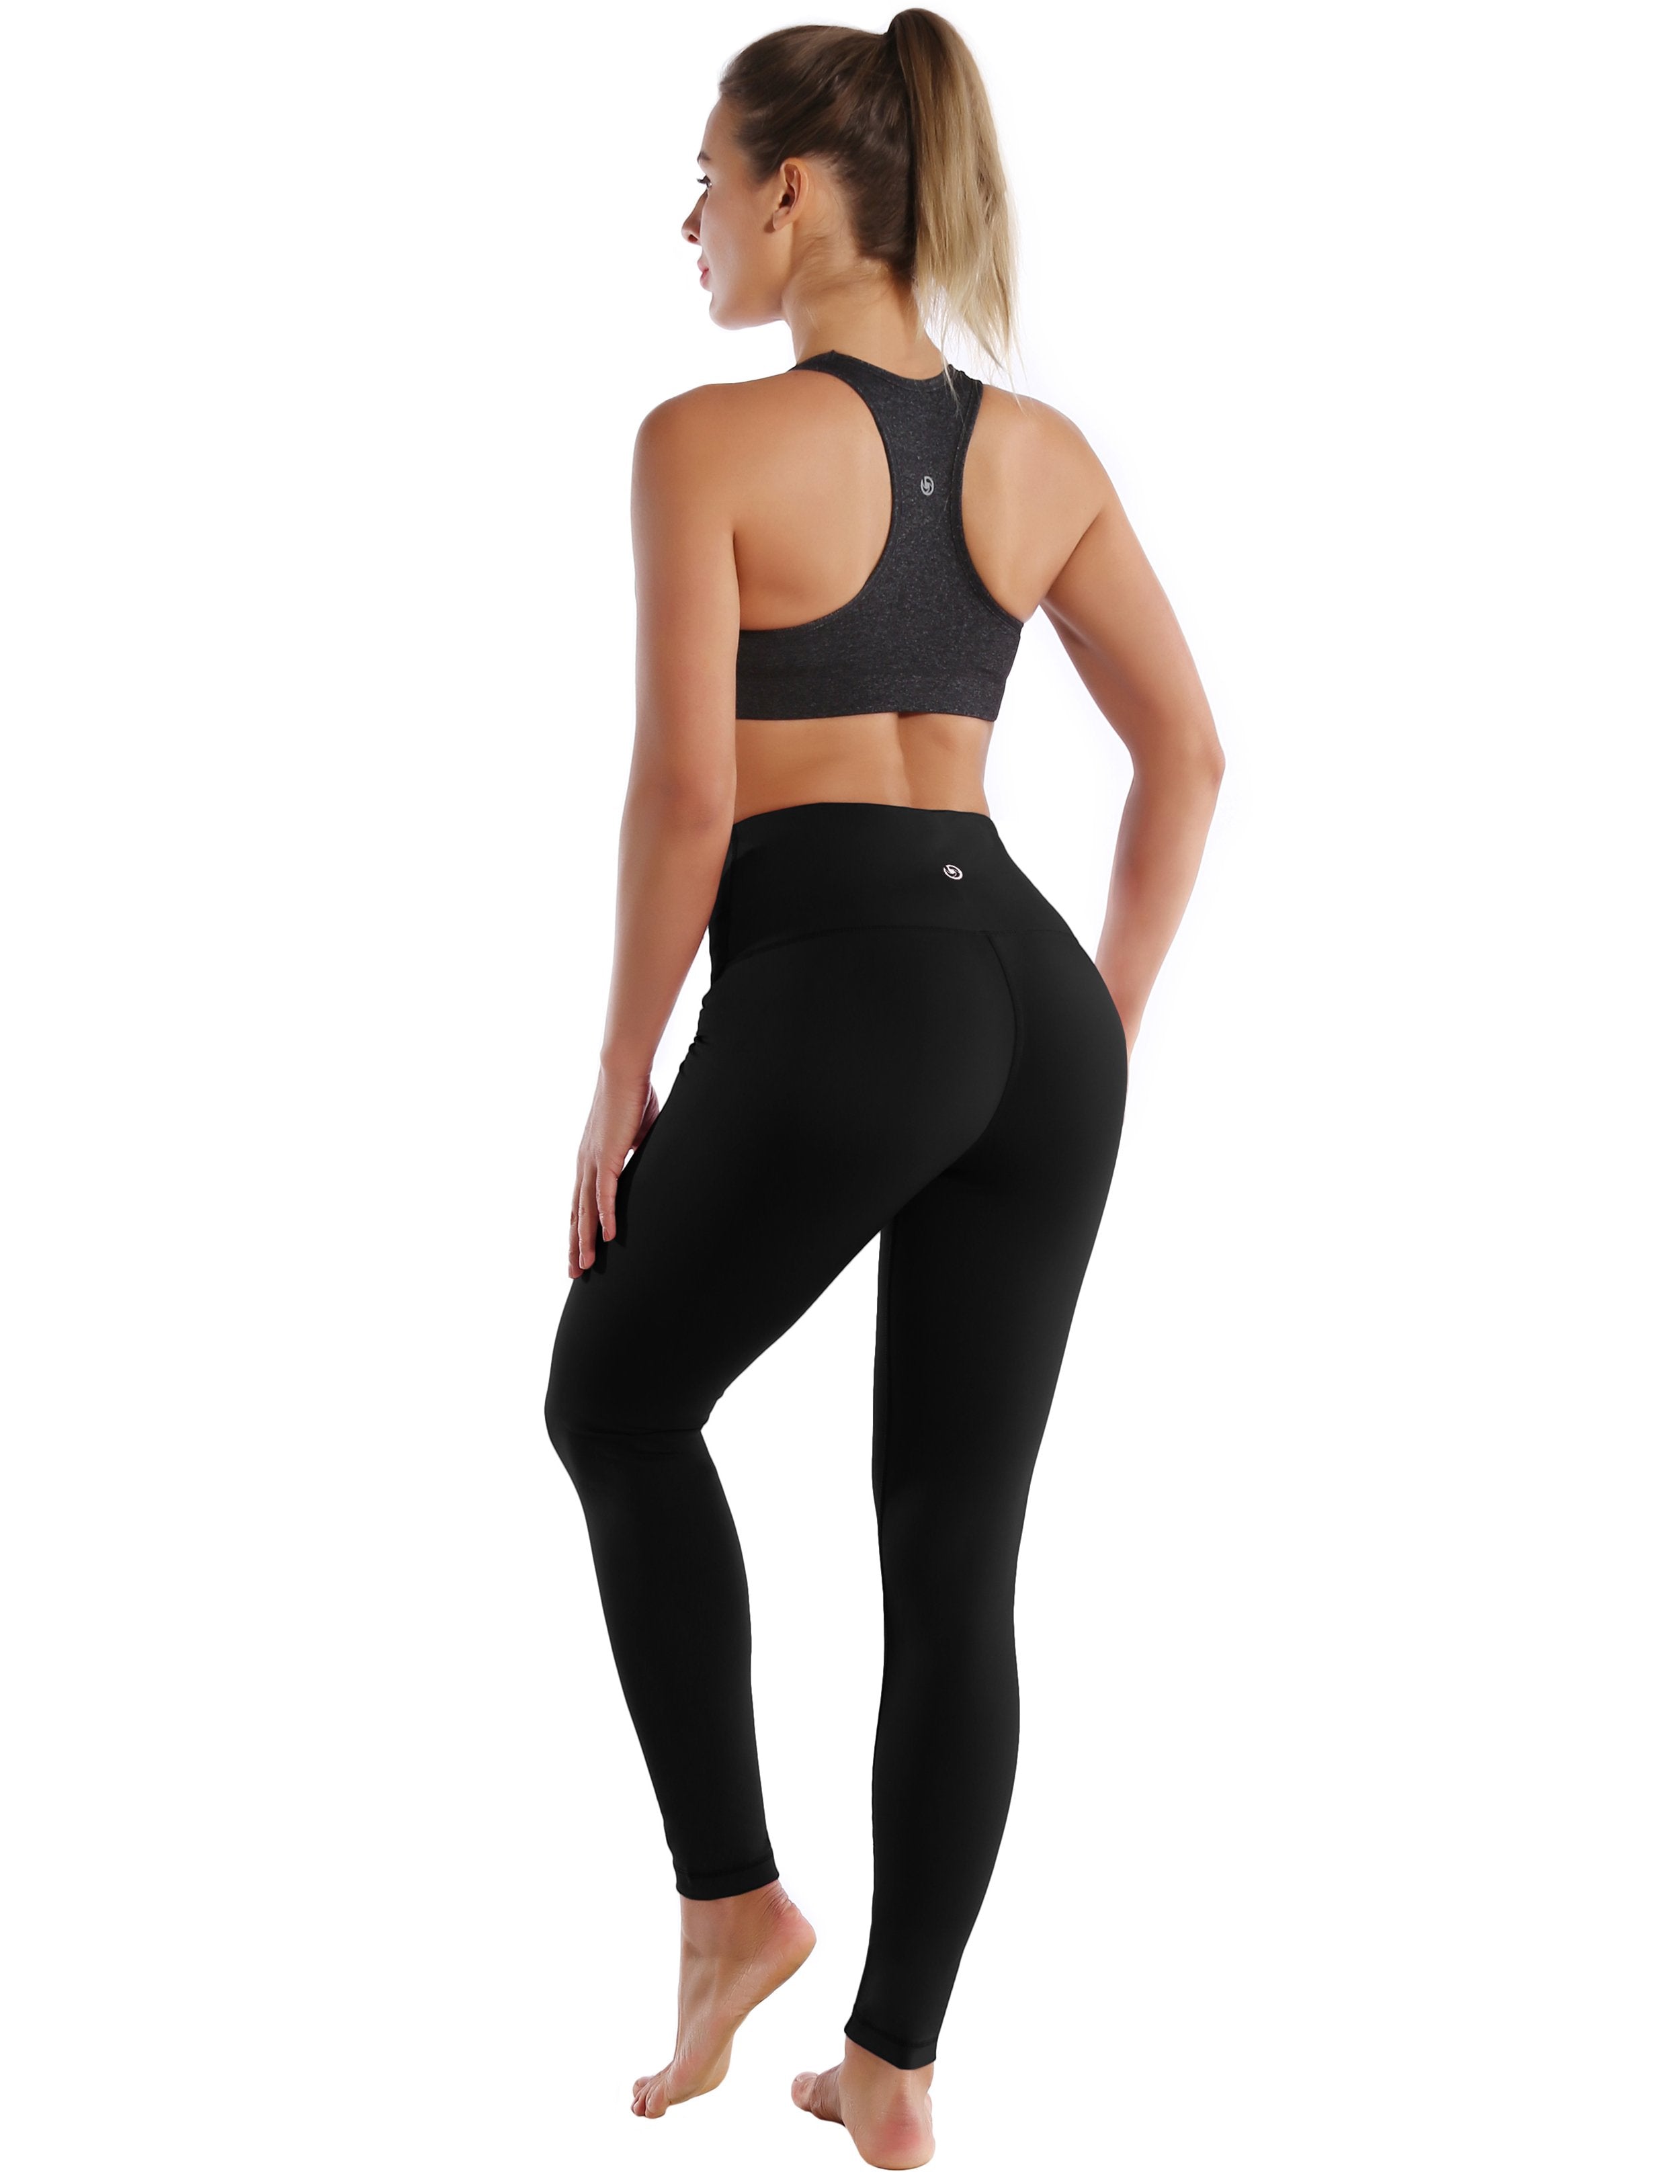 Bubblelime Waist Bootcut Yoga Pants Basic Tummy Control Workout Flare Black  Size M - $13 (74% Off Retail) New With Tags - From jello